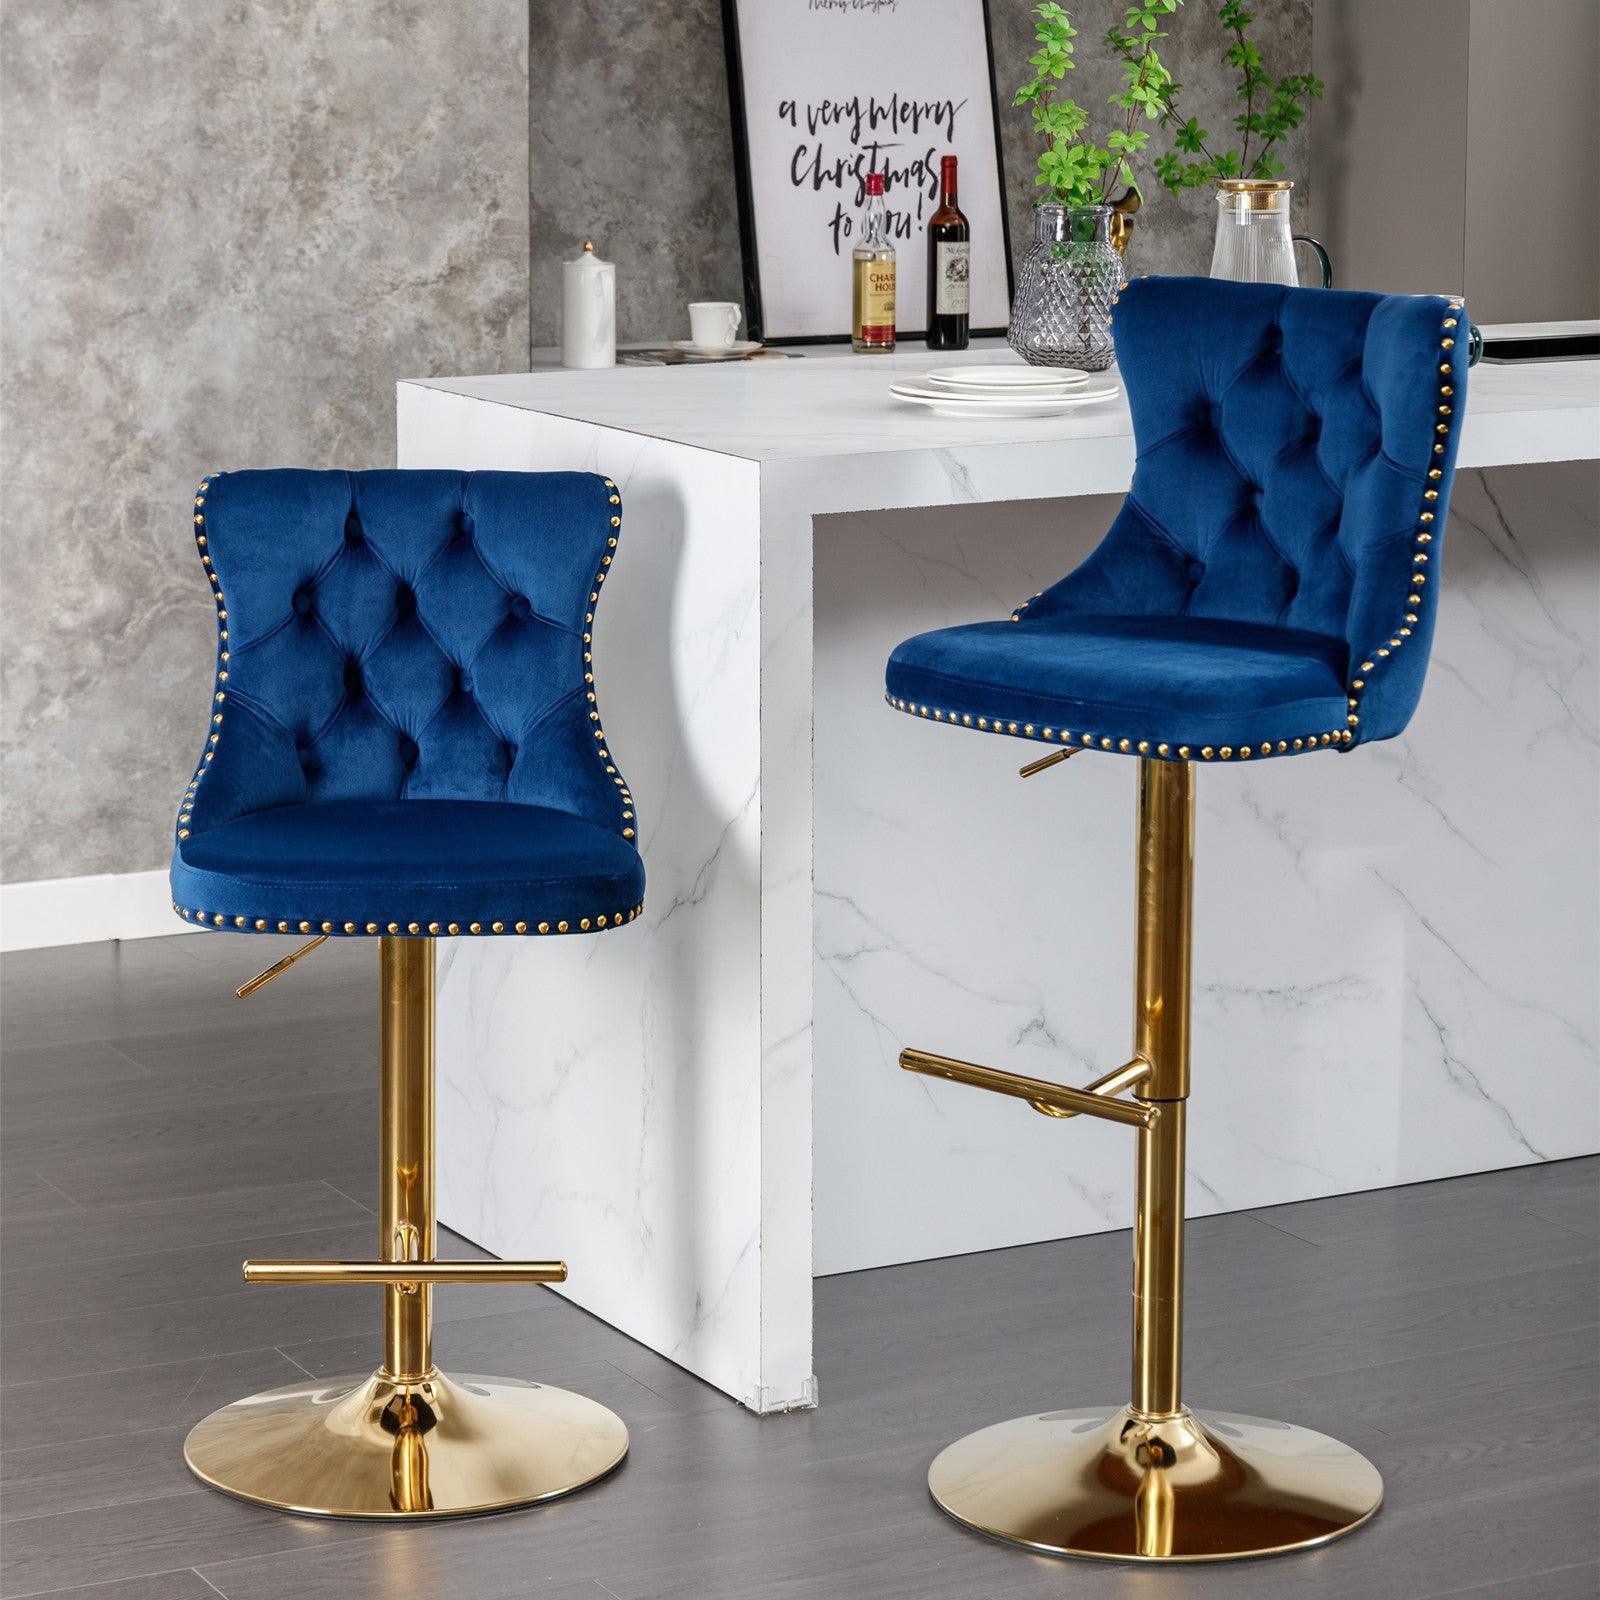 🆓🚛 Golden Swivel Velvet Barstools Adjusatble Seat Height From 25-33 Inch, Modern Upholstered Bar Stools With Backs Comfortable Tufted for Home Pub & Kitchen Island, Blue, Set Of 2